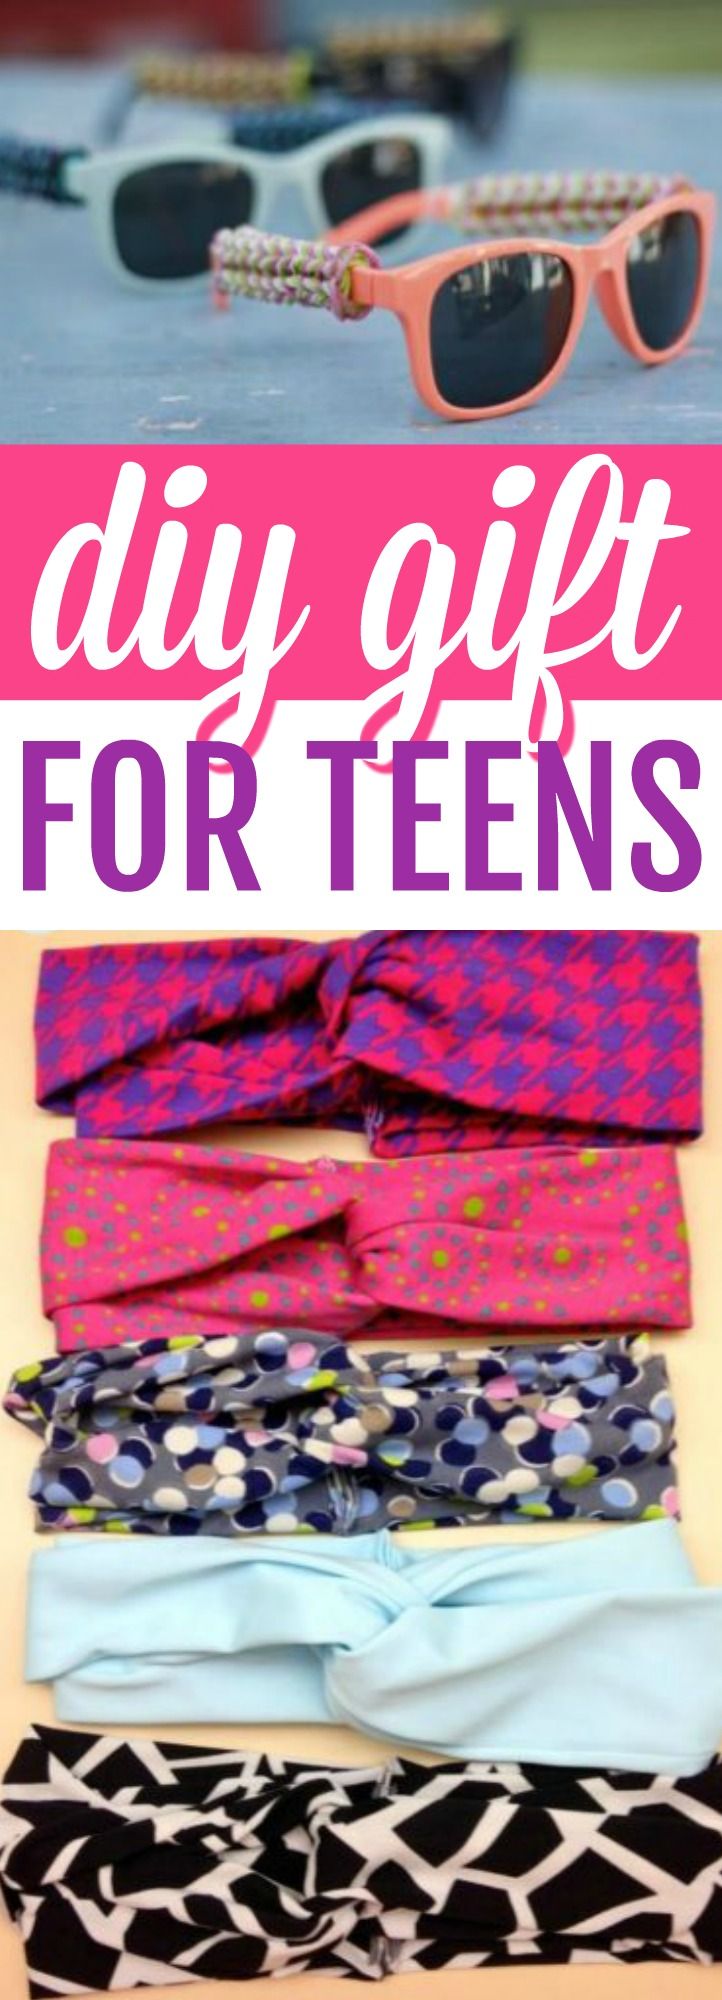 These 15 DIY gifts for teens are going to save you when it comes to birthday’s...